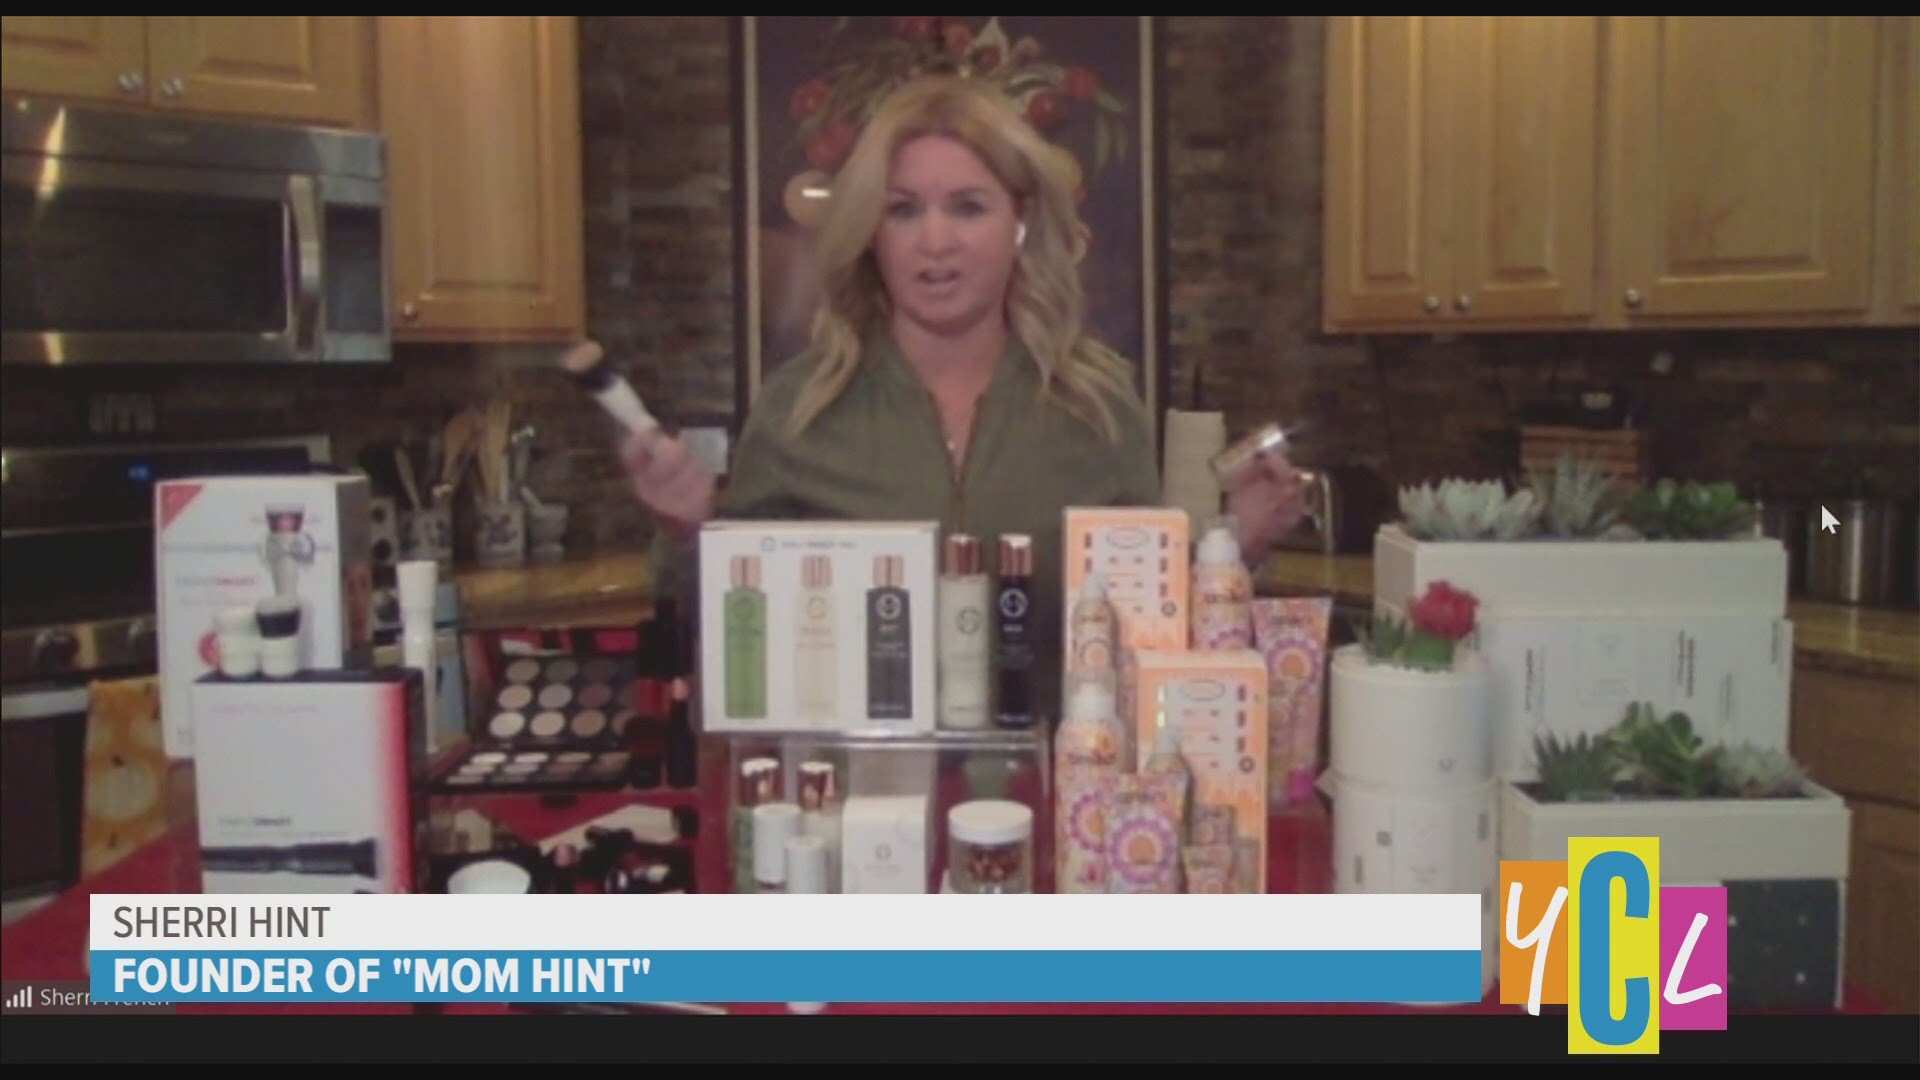 Get organized and shop now as lifestyle expert Sherri French helps you get ahead and save money with holiday shopping. This segment was paid for by Mom Hint.